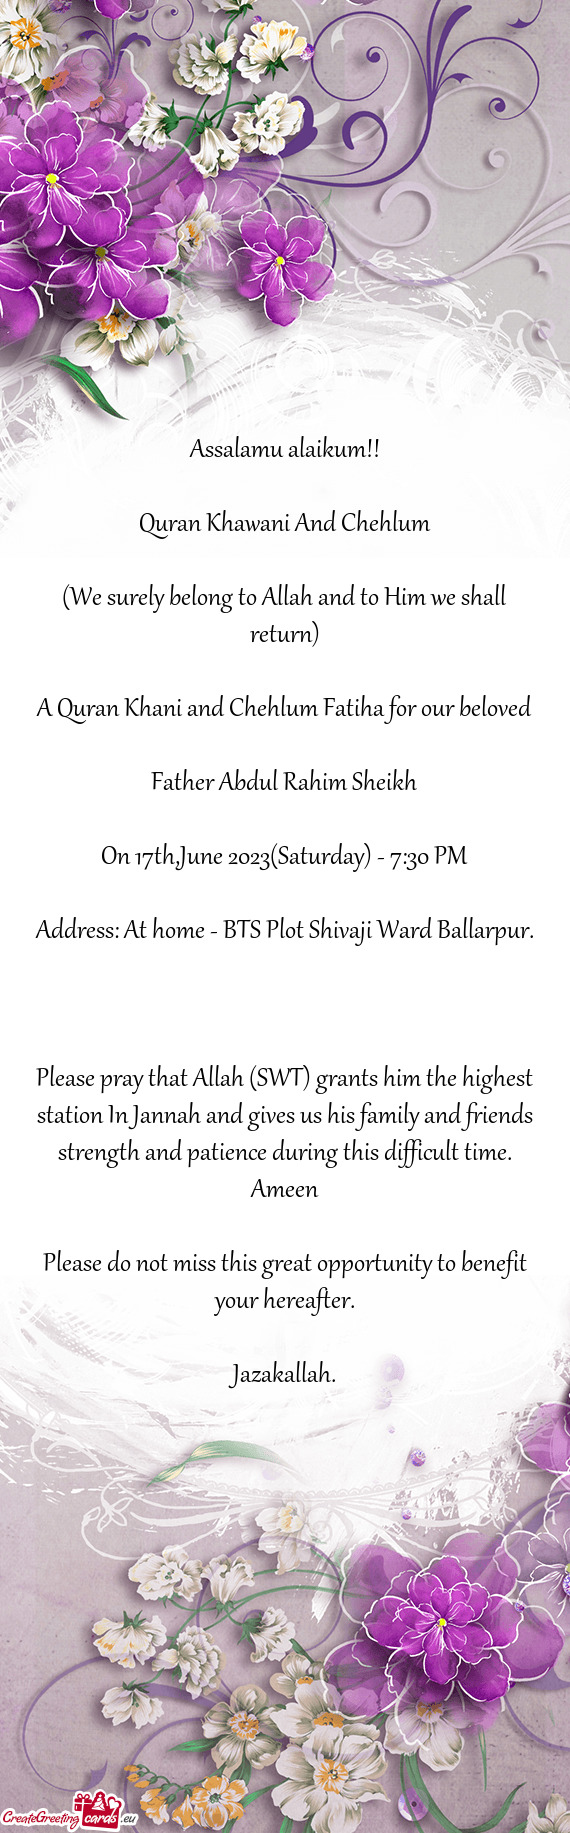 A Quran Khani and Chehlum Fatiha for our beloved